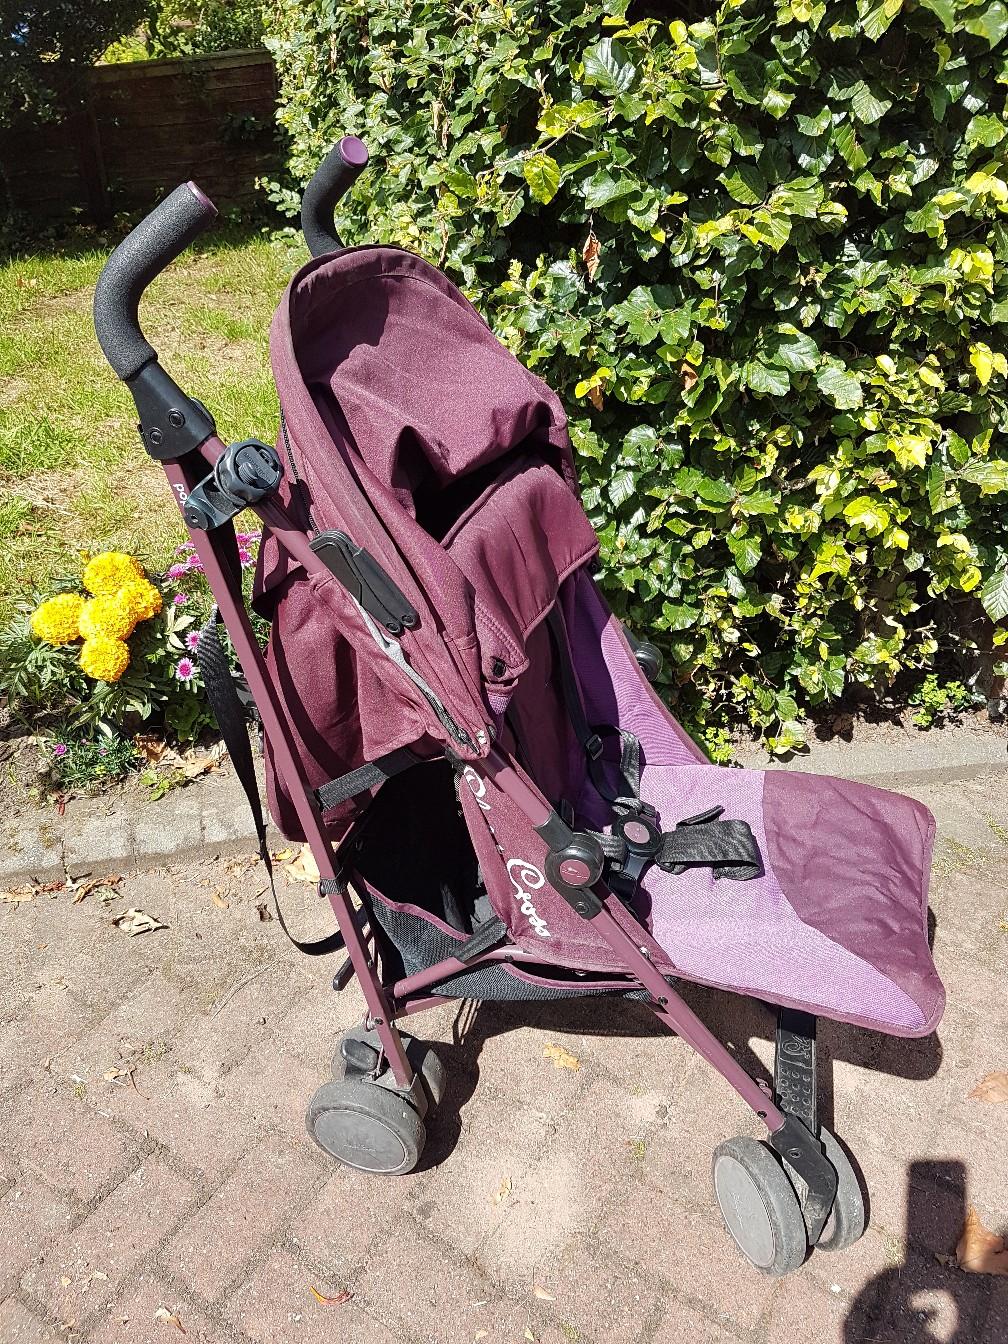 Silver Cross Pop Buggy in M41 Urmston for £30.00 for sale | Shpock